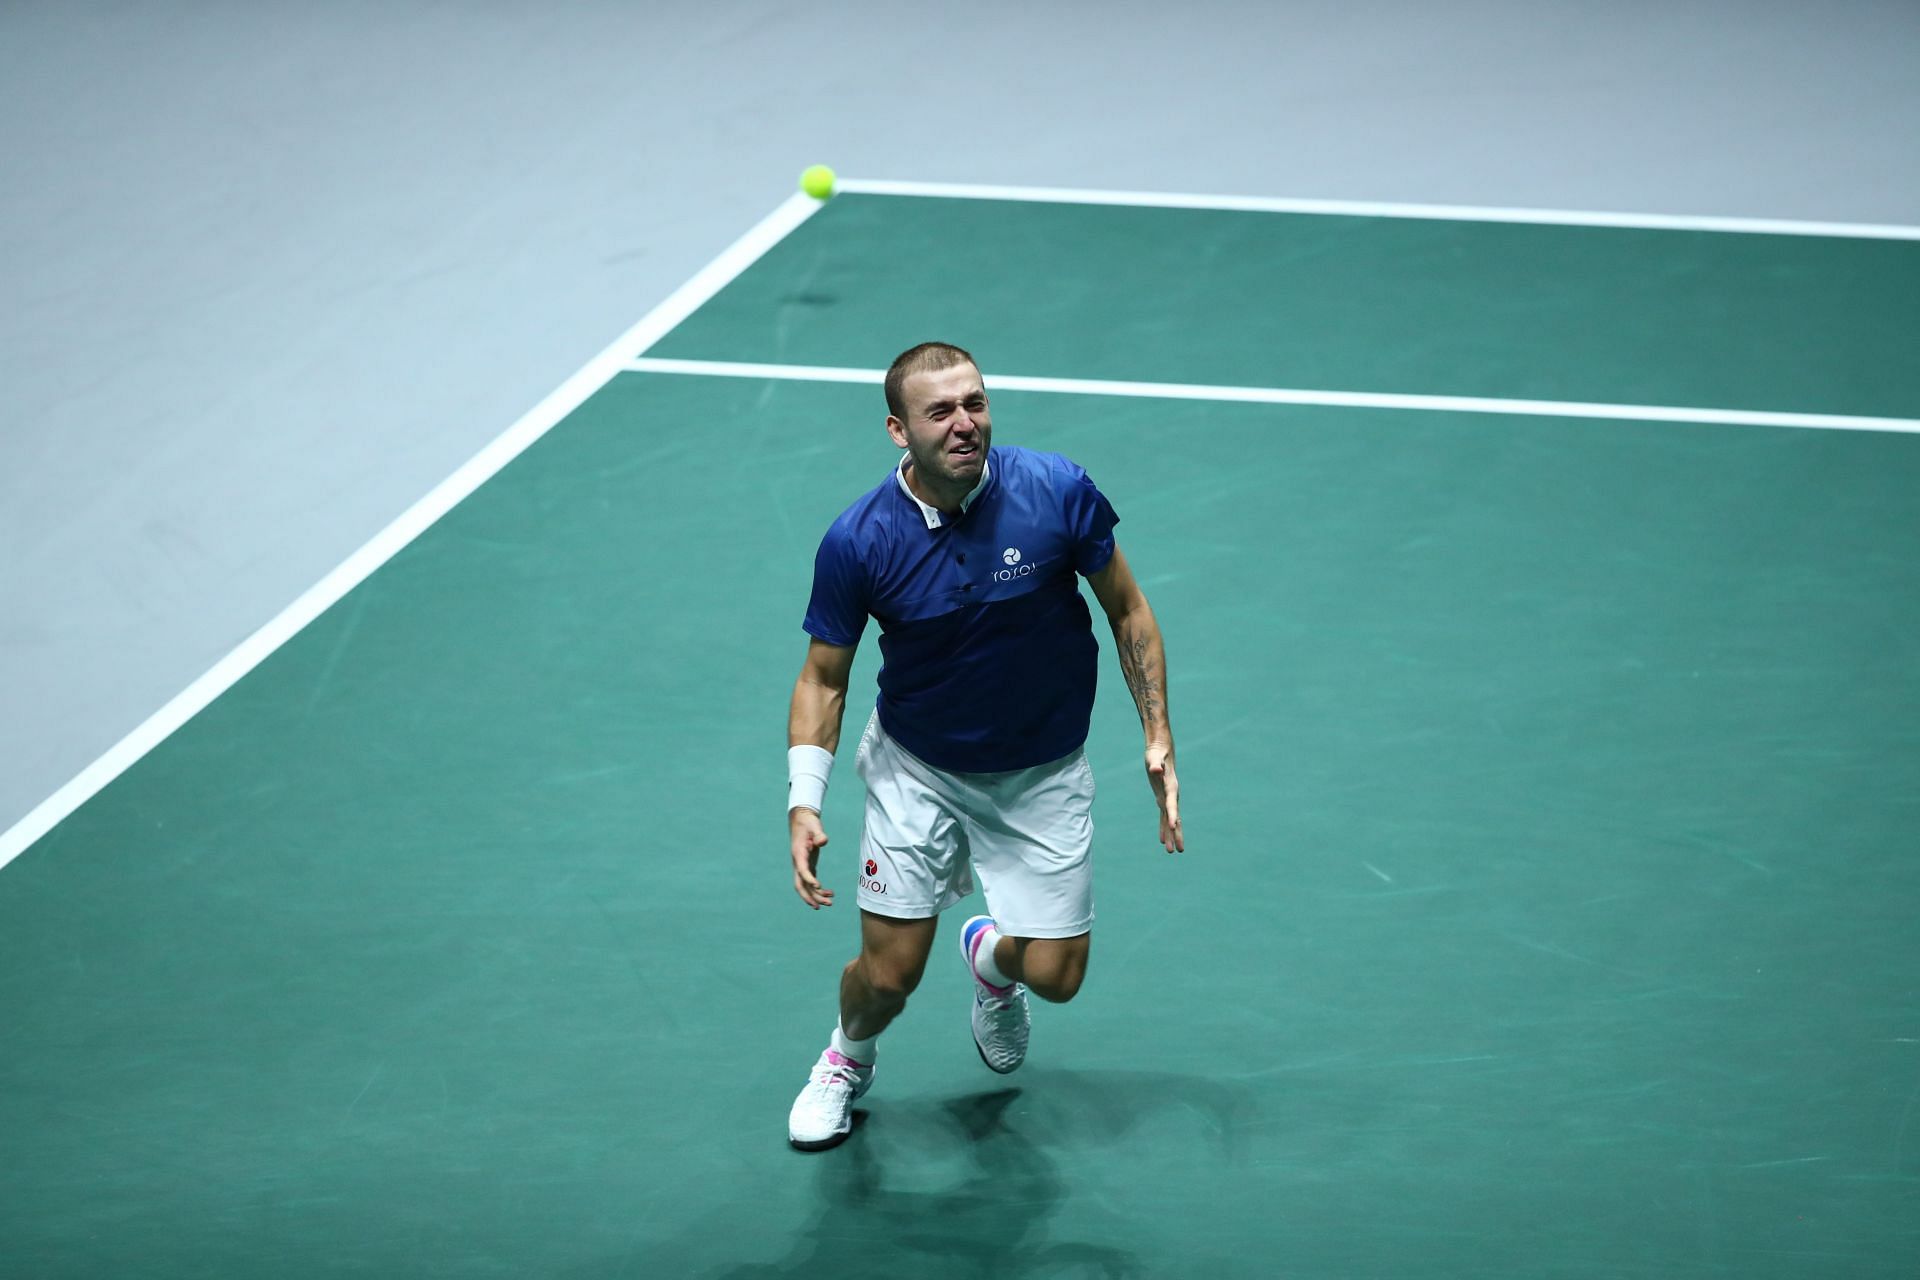 Evans dropped only three games in his opening-round win/